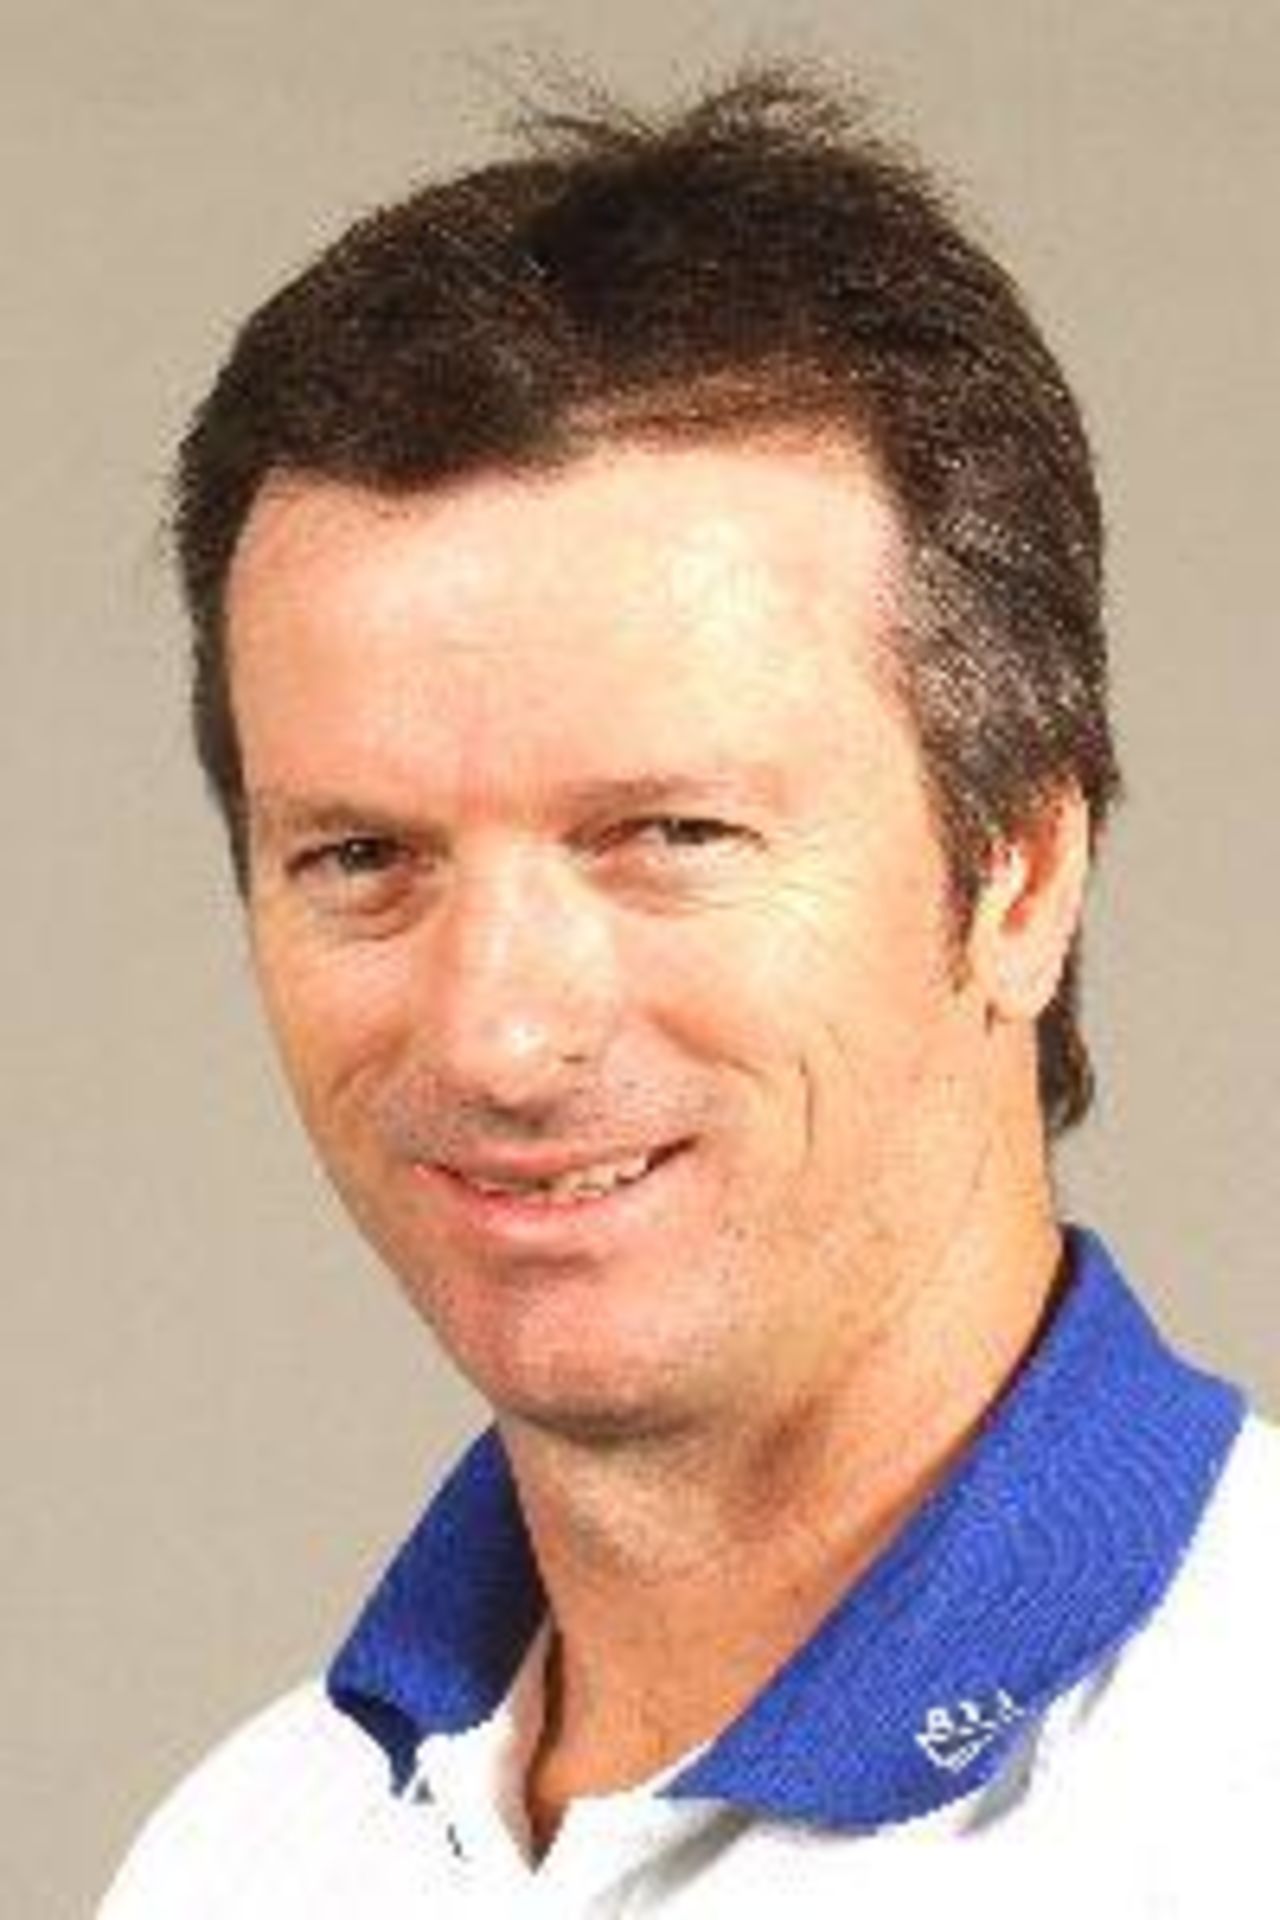 Portrait of Steve Waugh, New South Wales, August 2002